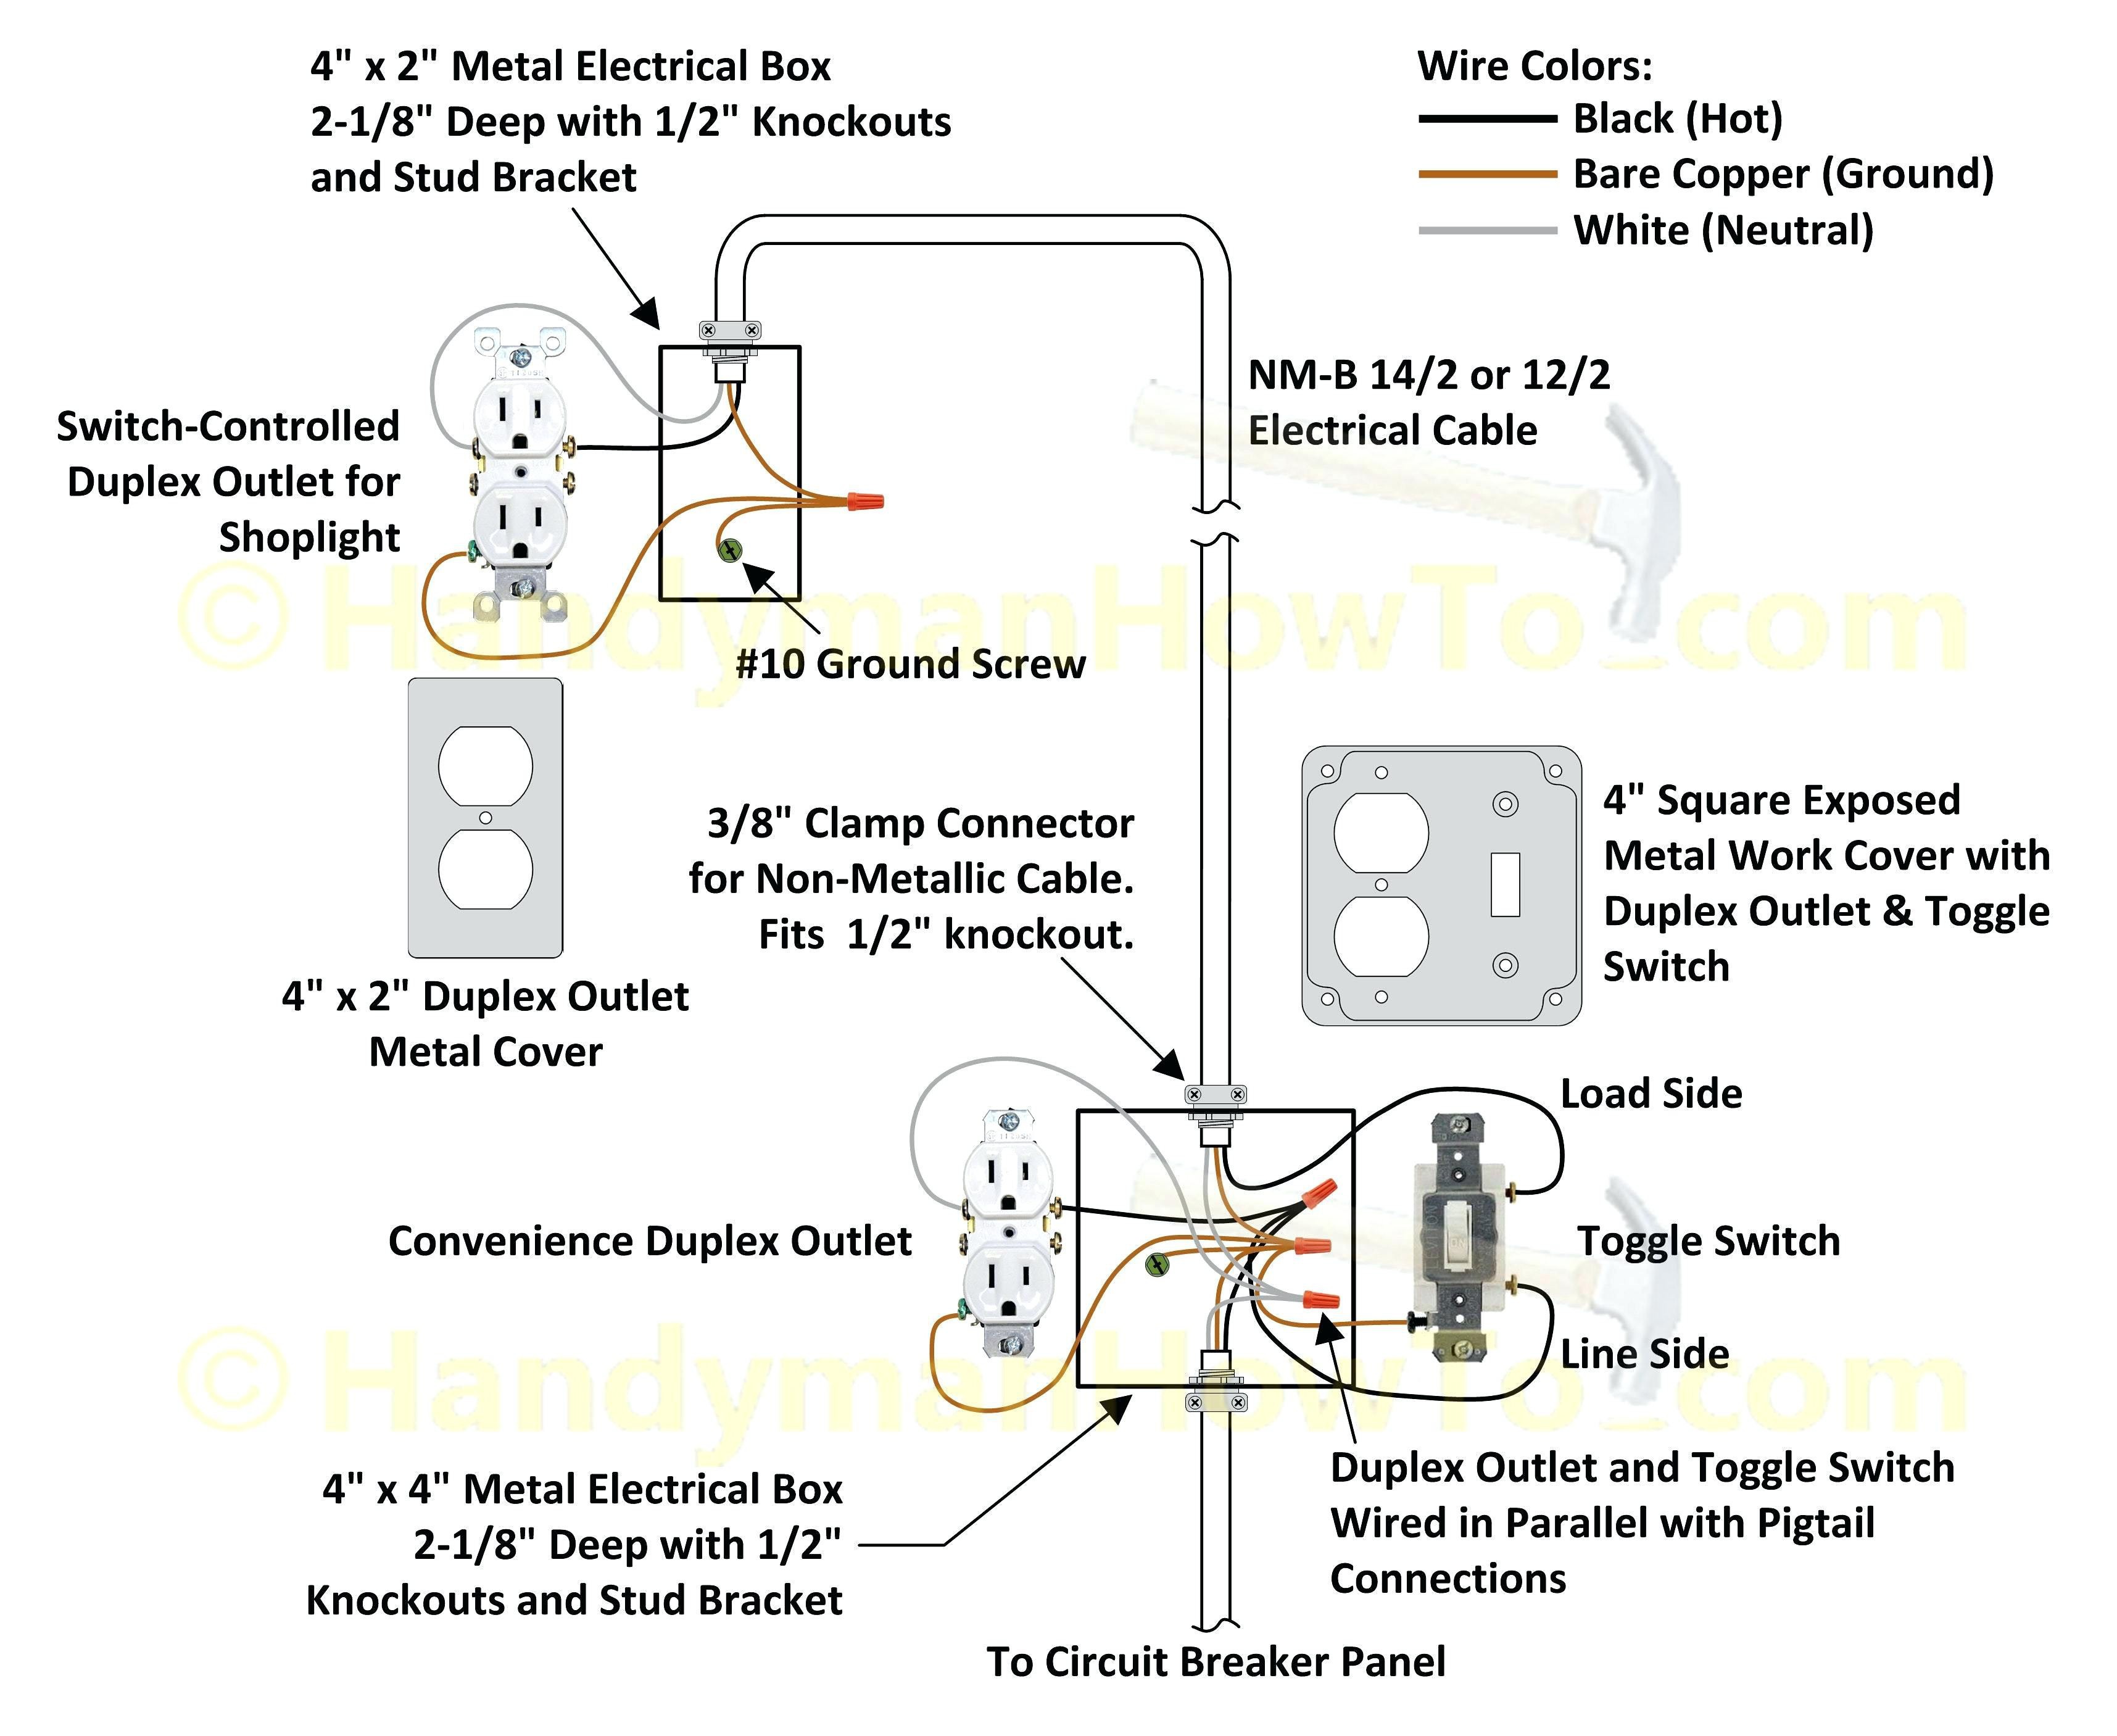 Home Phone Wiring Diagram Using Cat5 Cable Fresh Rj11 Wiring with Cat5 Cable Wire Center •